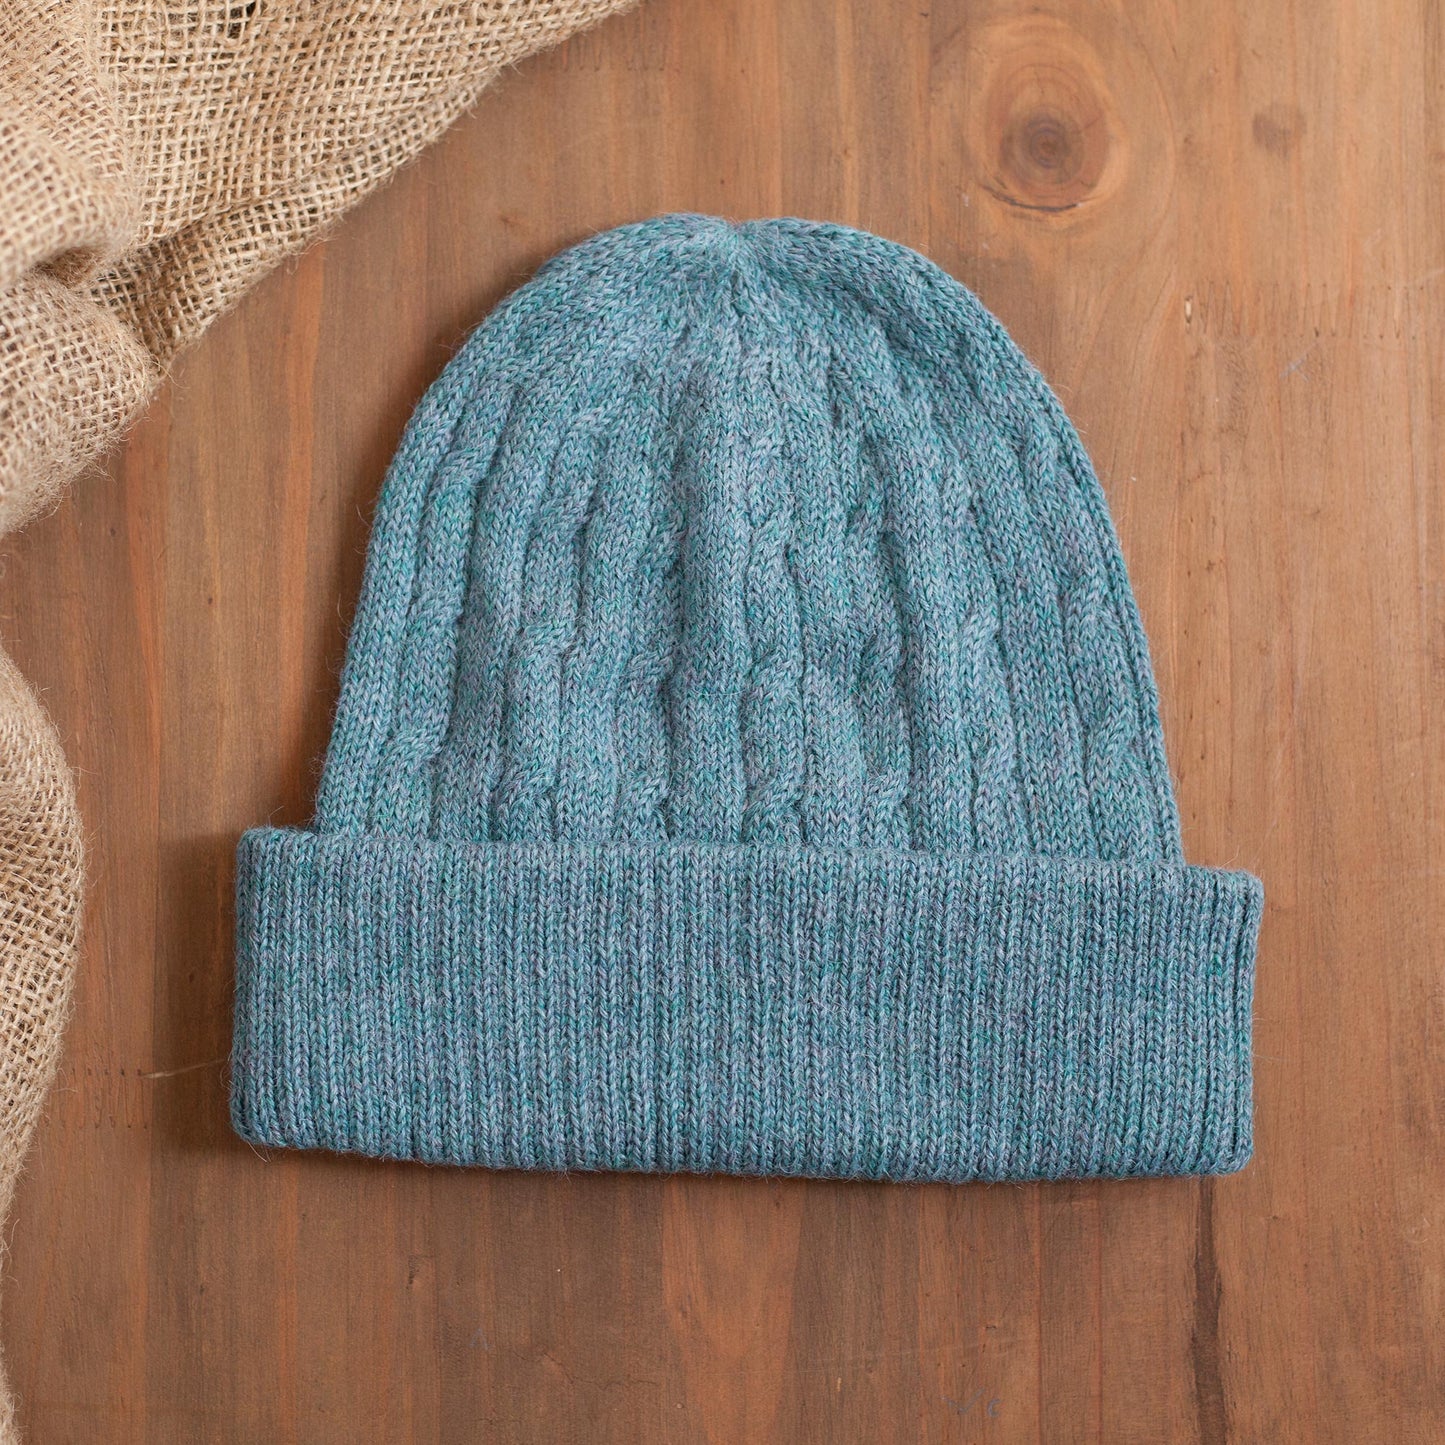 Comfy in Blue Robin's Egg Blue 100% Alpaca Soft Cable Knit Hat from Peru